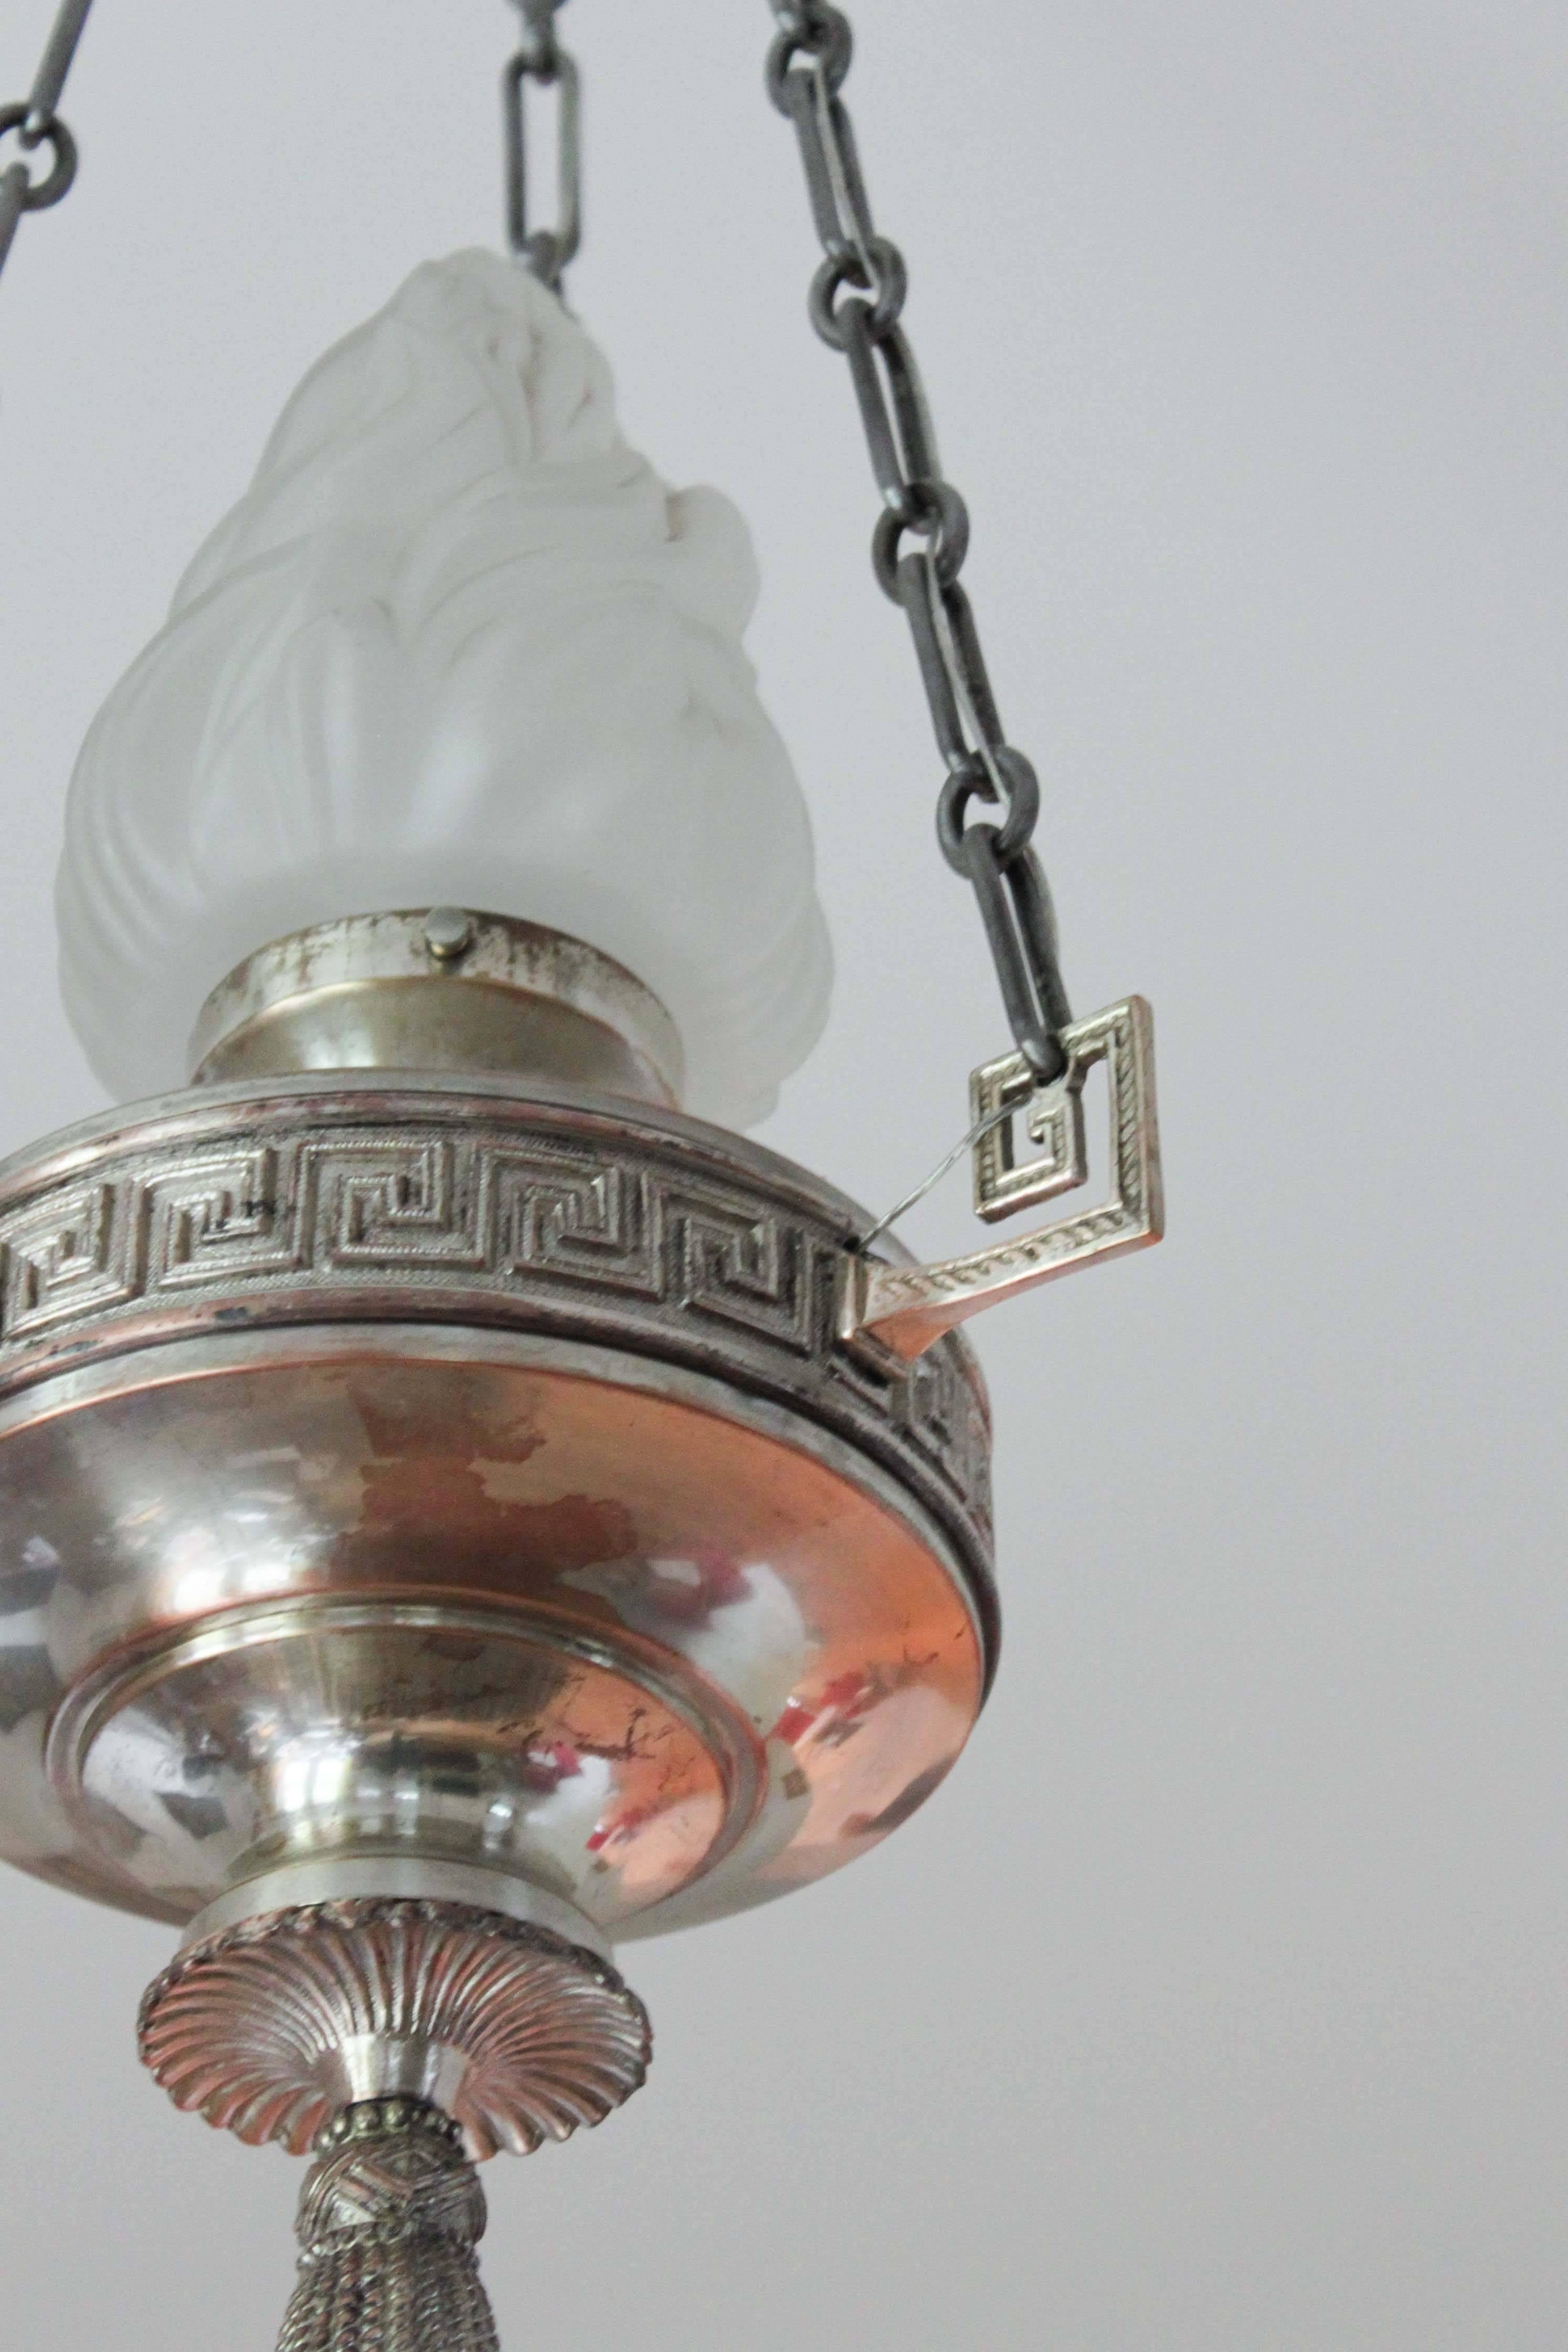 Antique sanctuary light with flame shade, circa 1930. Completely restored silver plate finish over Greek key motif and matched canopy.